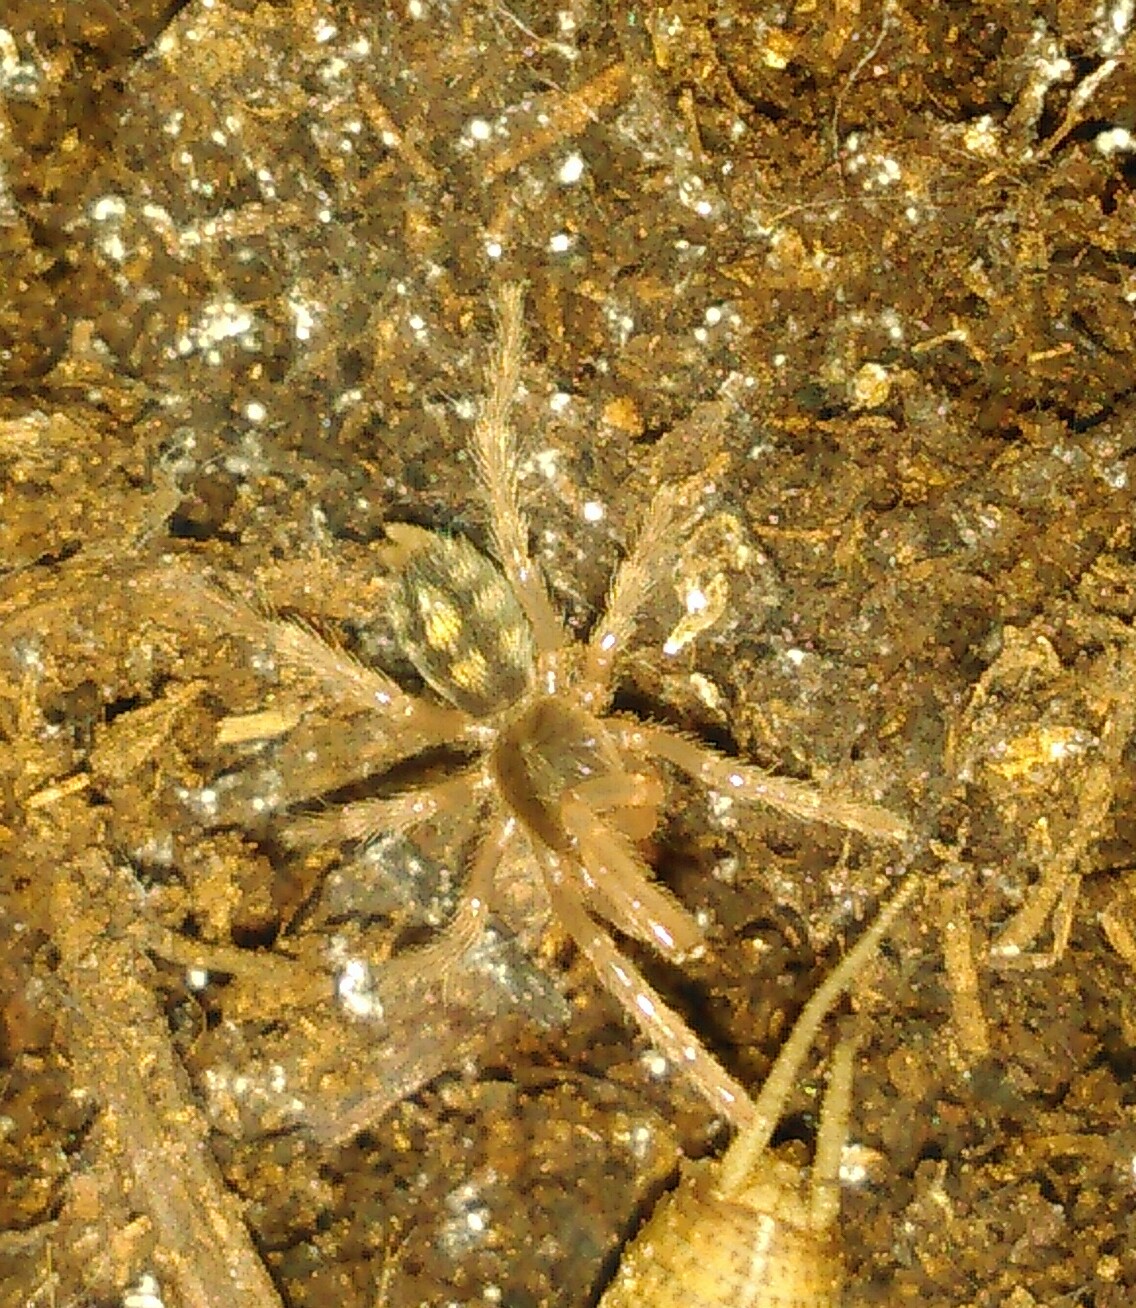 H.sp columbia sling.